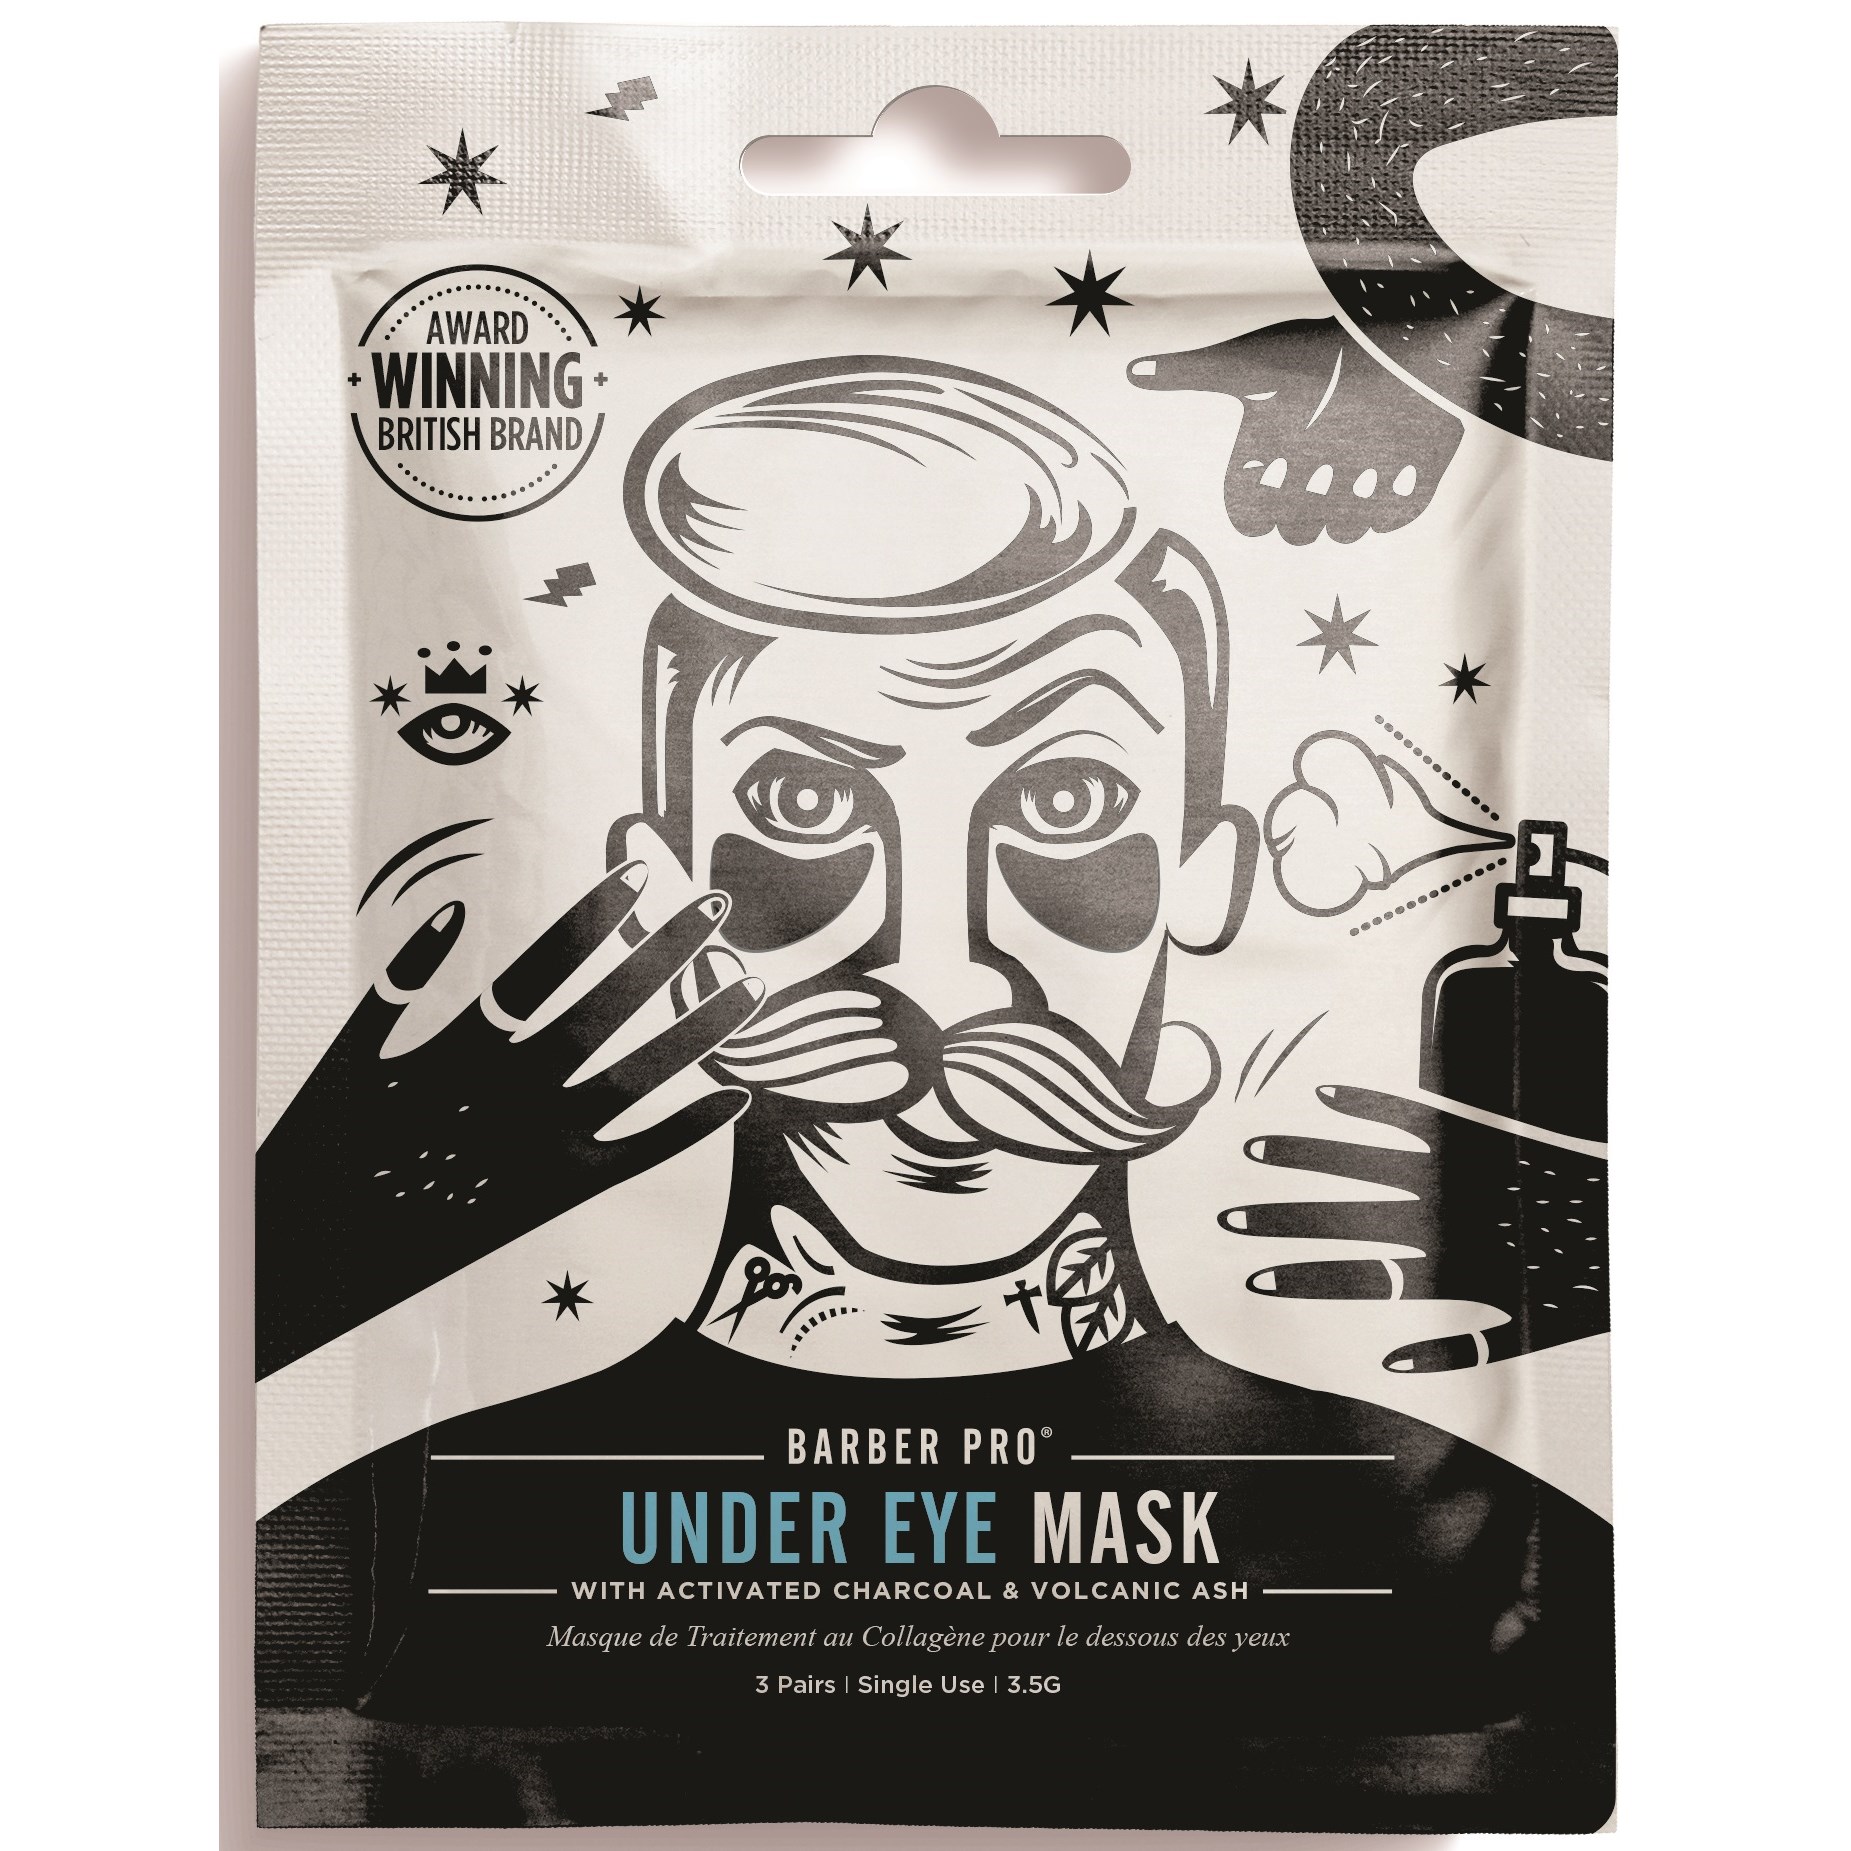 Barber pro Under Eye Mask With Activated Charcoal & Volcanic Ash